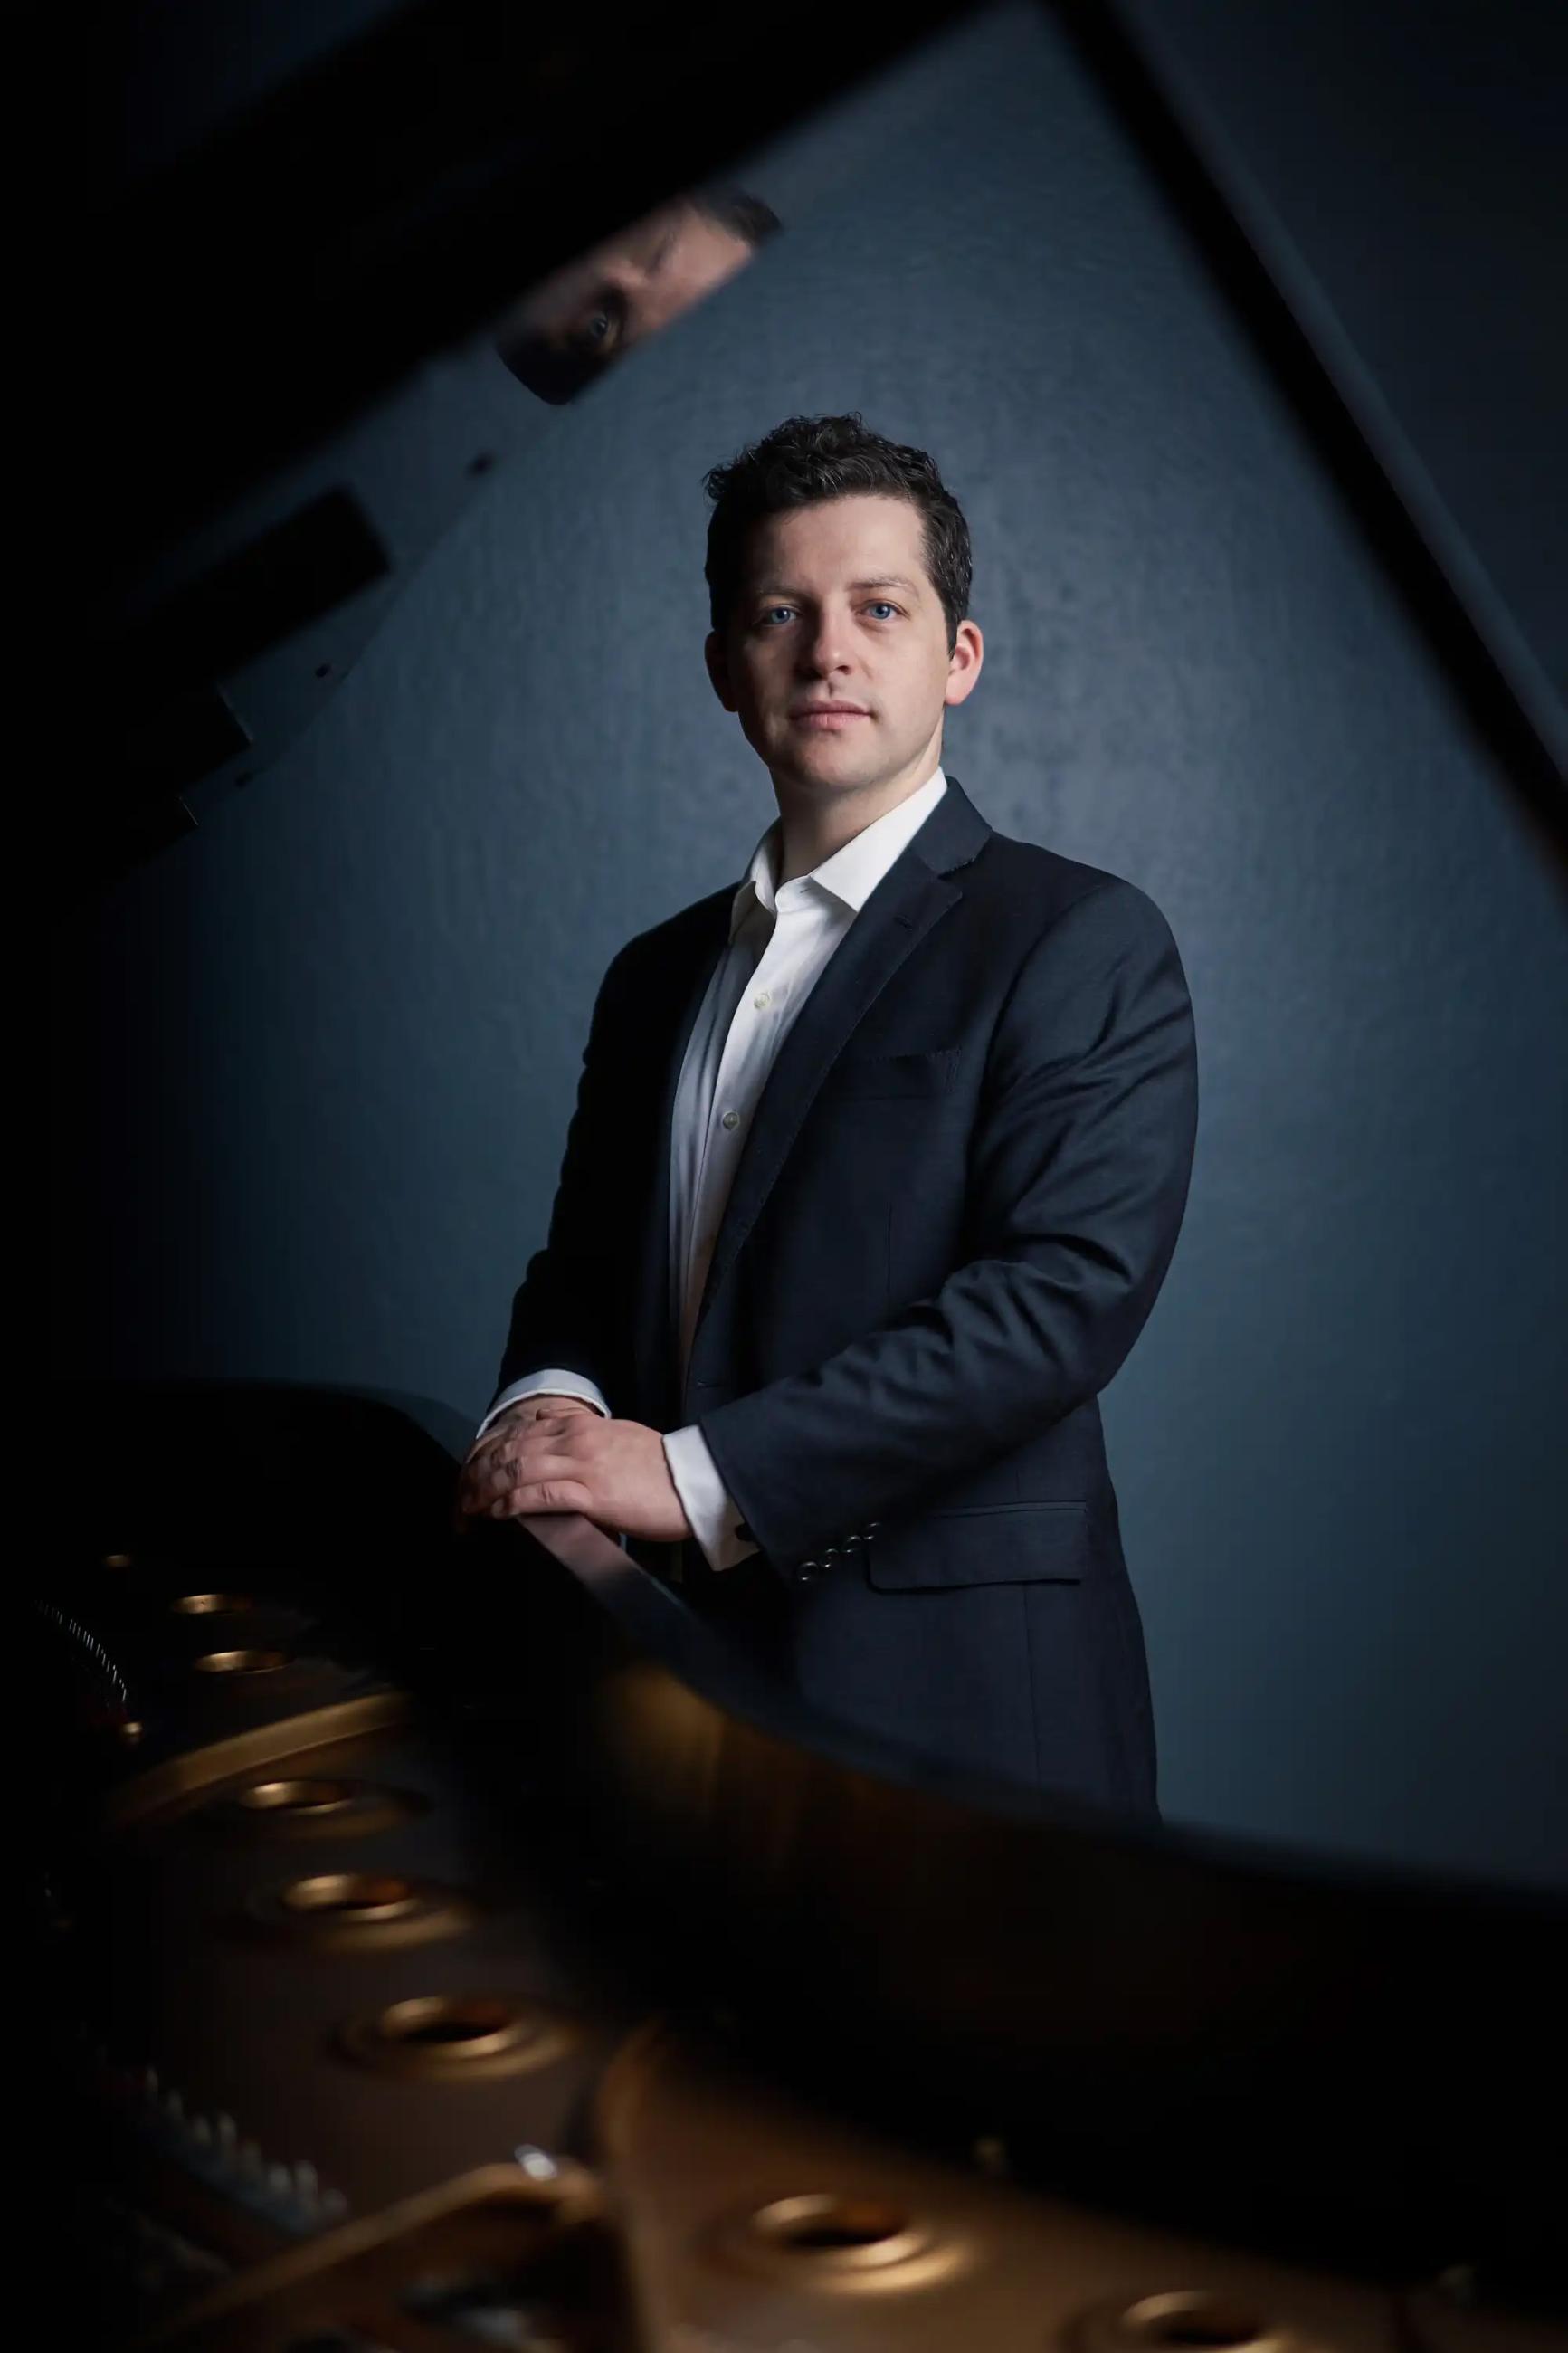 Henry Kramer standing spotlit in a suit with perfect posture, a calm face, and hands resting on top of a piano